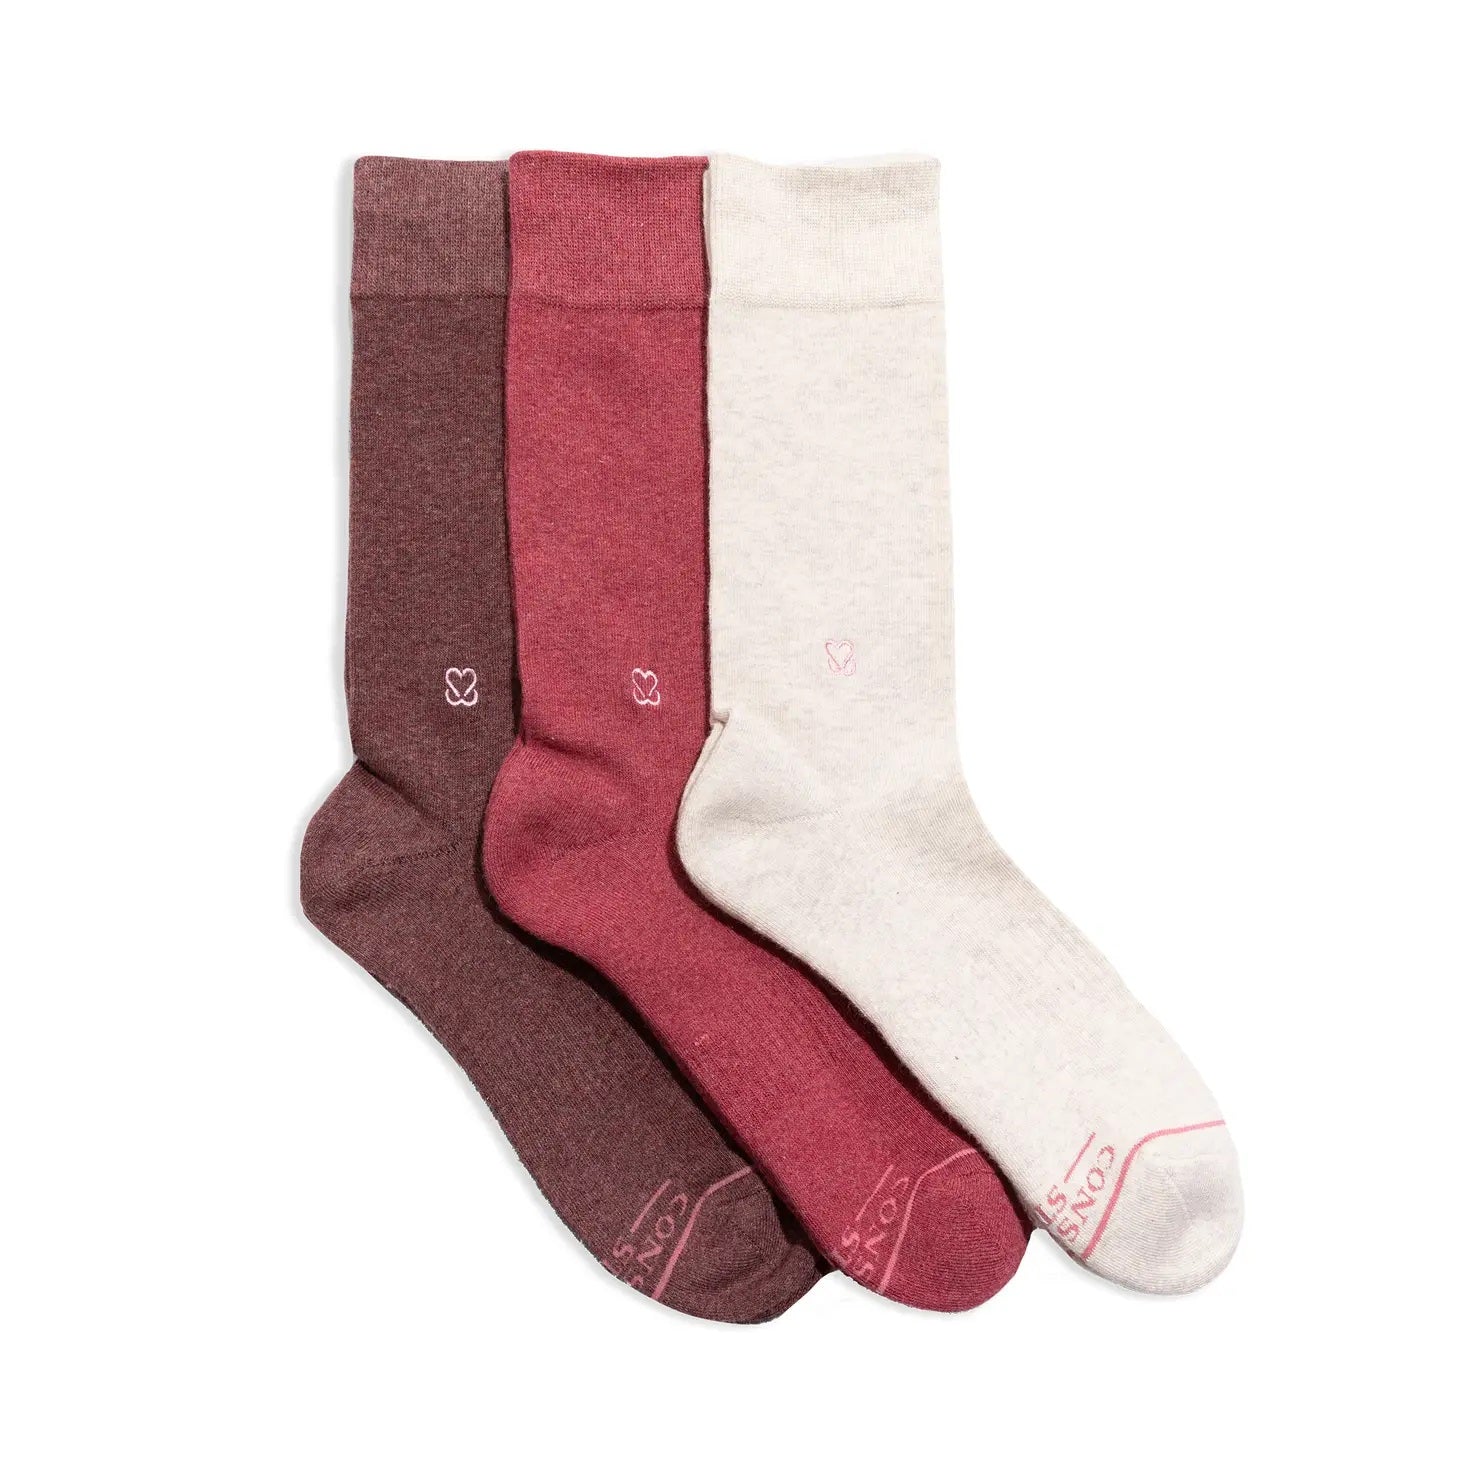 Conscious Step, Boxed Set Socks That Support Self Checks Prevent Breast Cancer - Boutique Dandelion